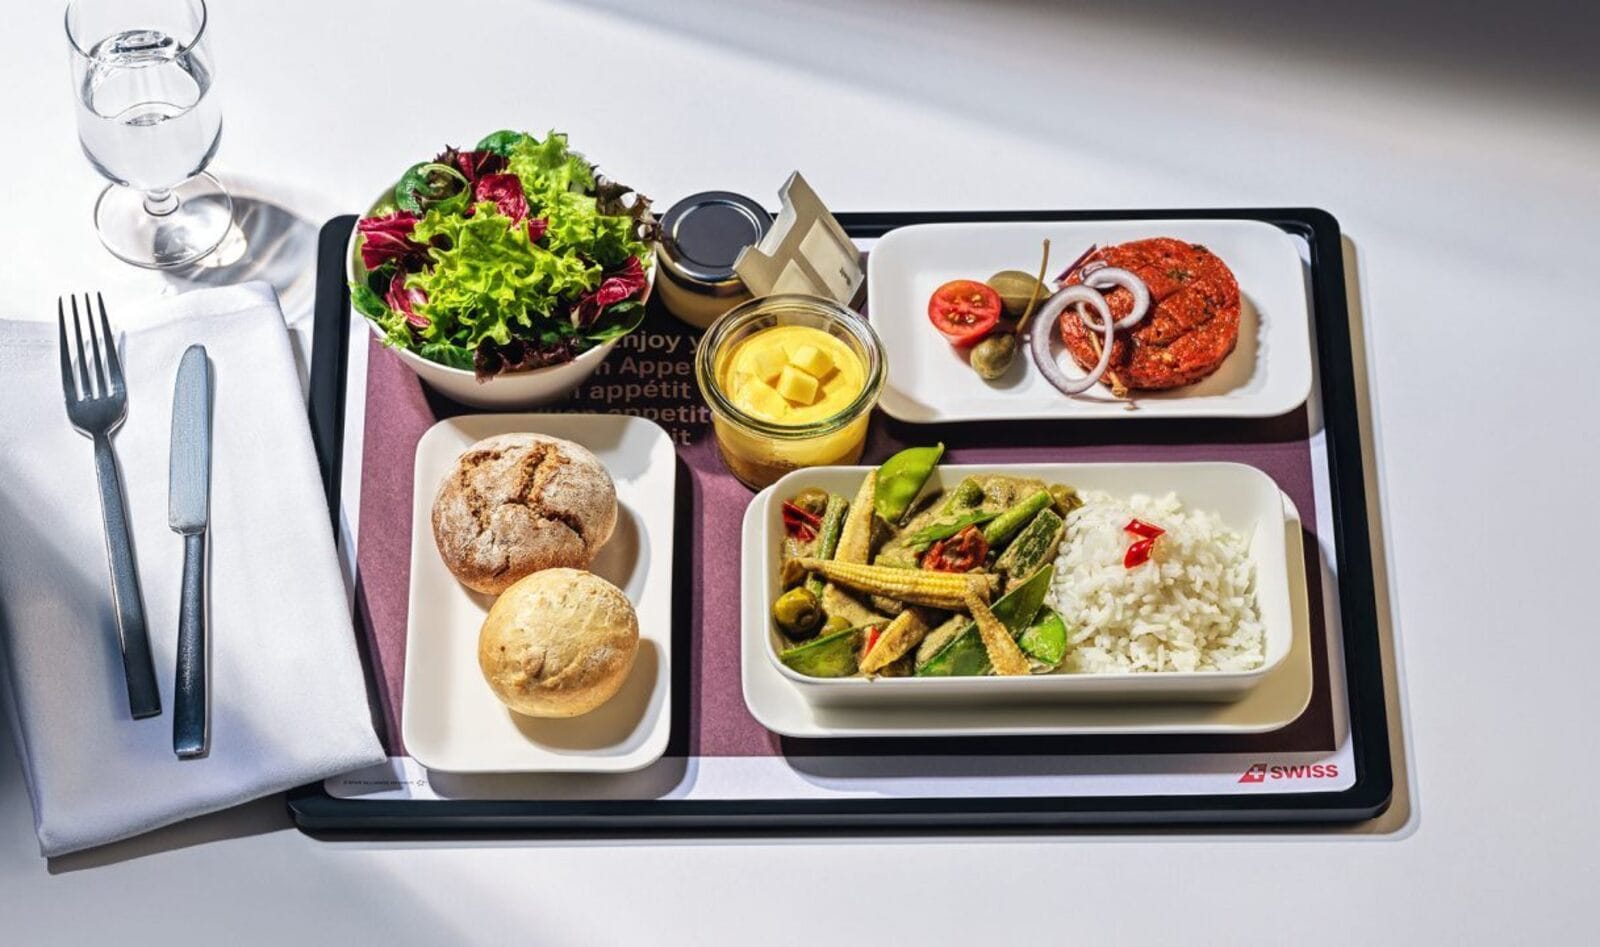 The 7 Best Vegan Airline Meal Options: Know Before You Fly